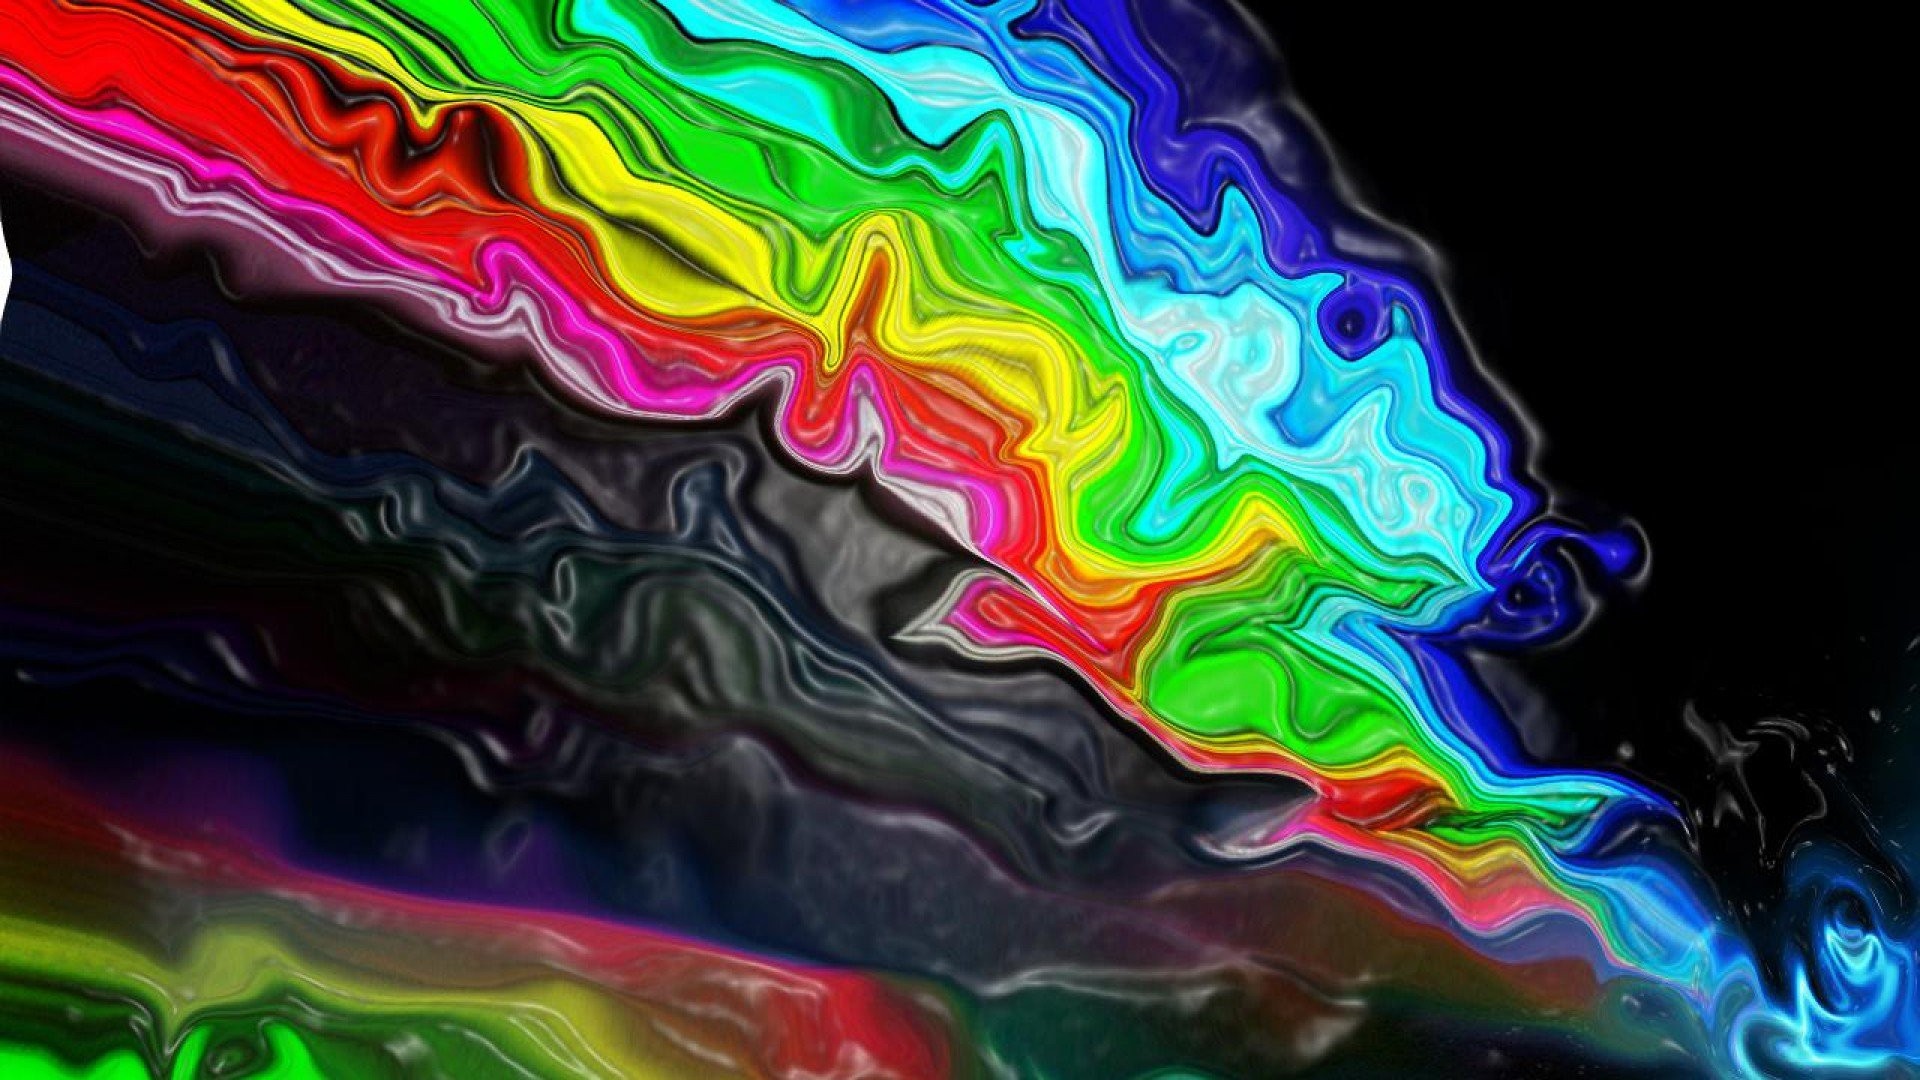 Wallpaper HD Trippy Colorful With Resolution 1920X1080